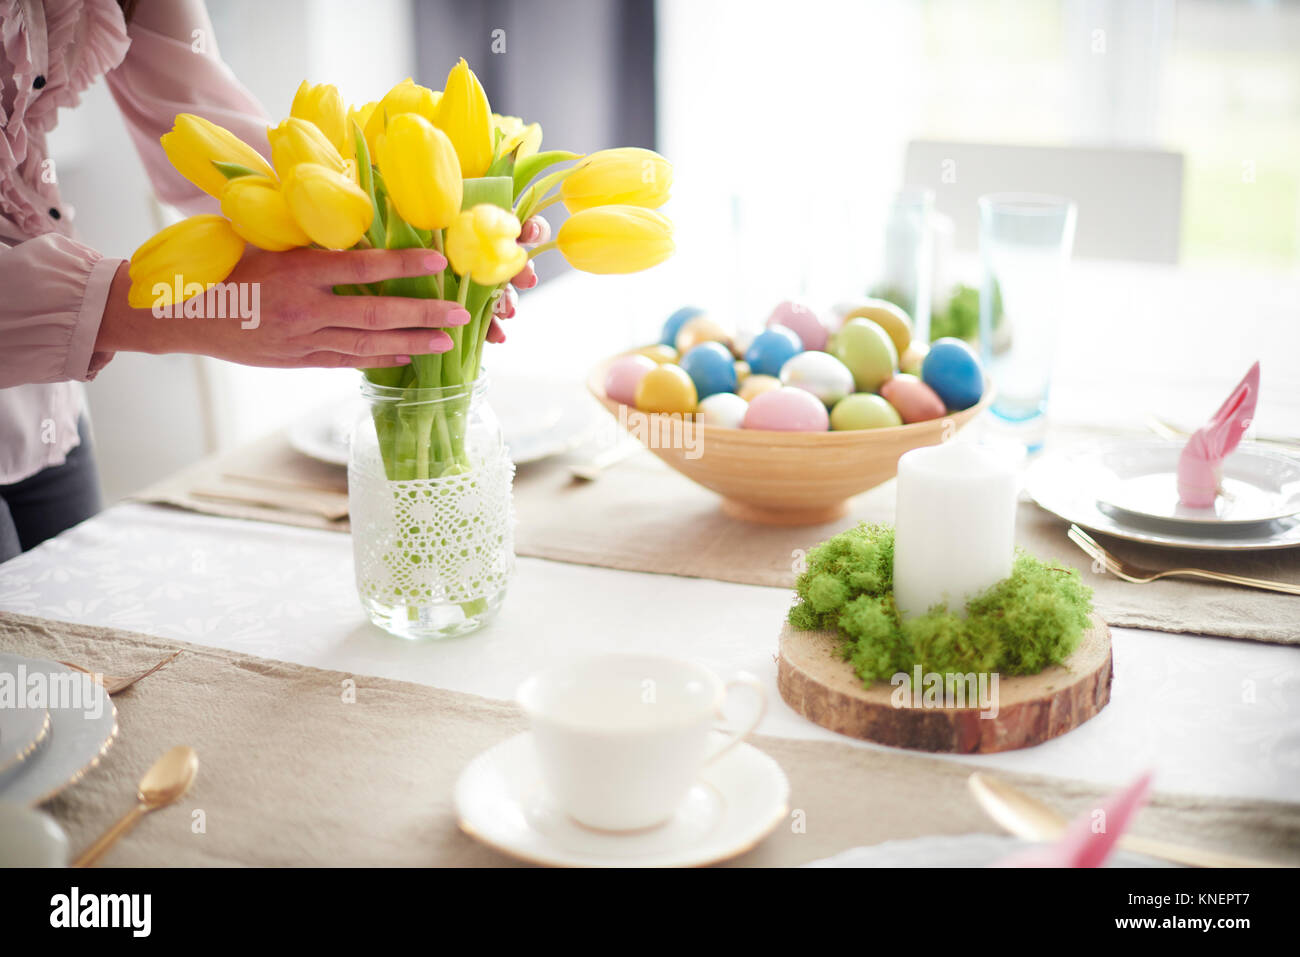 Hands of woman arranging yellow tulips at easter dining table Stock Photo